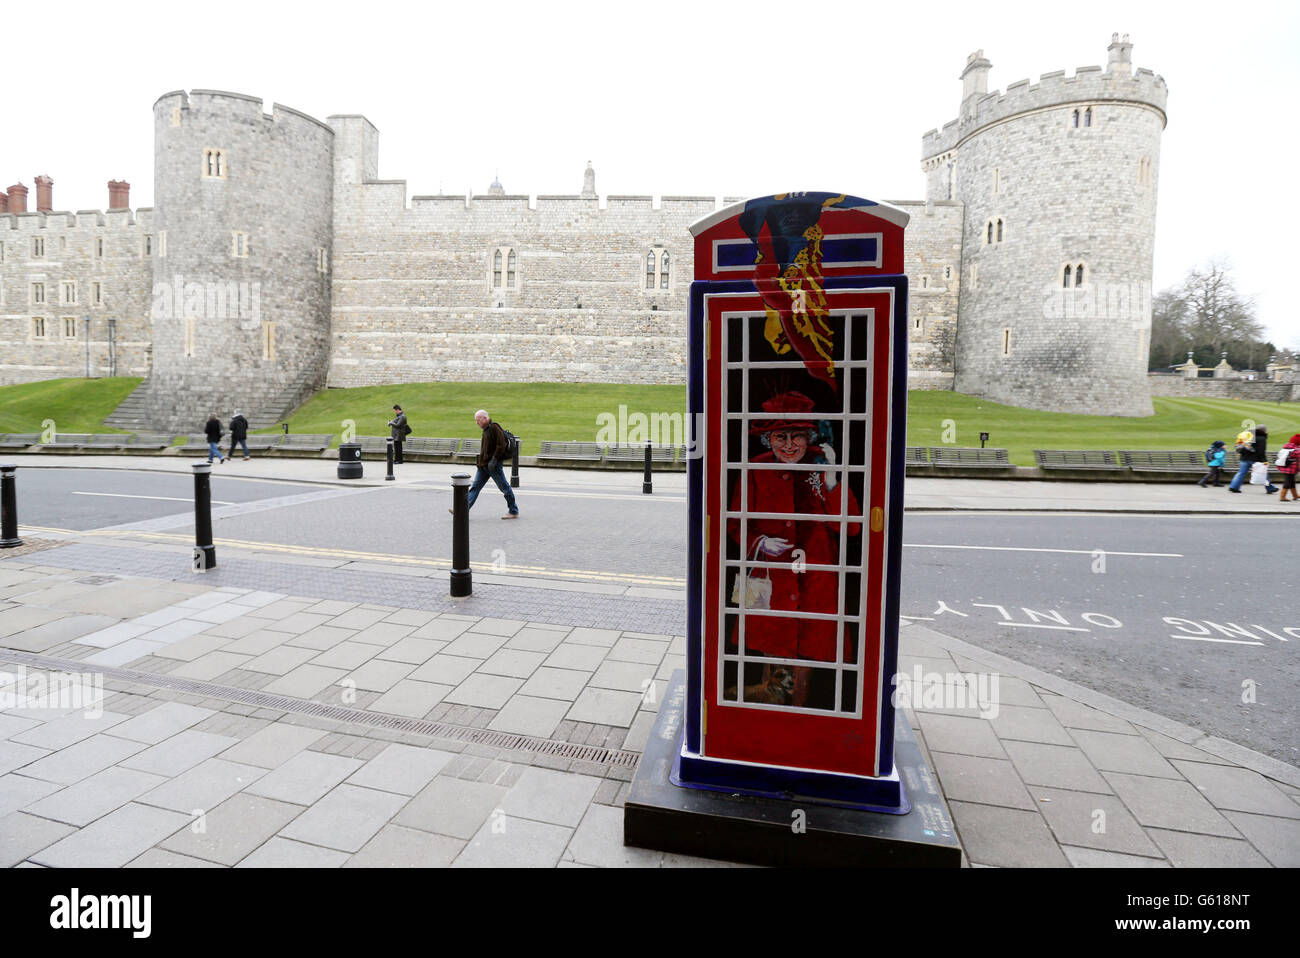 A phone box with images of Queen Elizabeth II, Prince Harry and the Duchess of Cambridge is on display in Windsor, Berkshire. The phonebox has been designed and painted by TV star Timmy Mallett and been named 'Ring-a-Royal-Phonebox'. Stock Photo